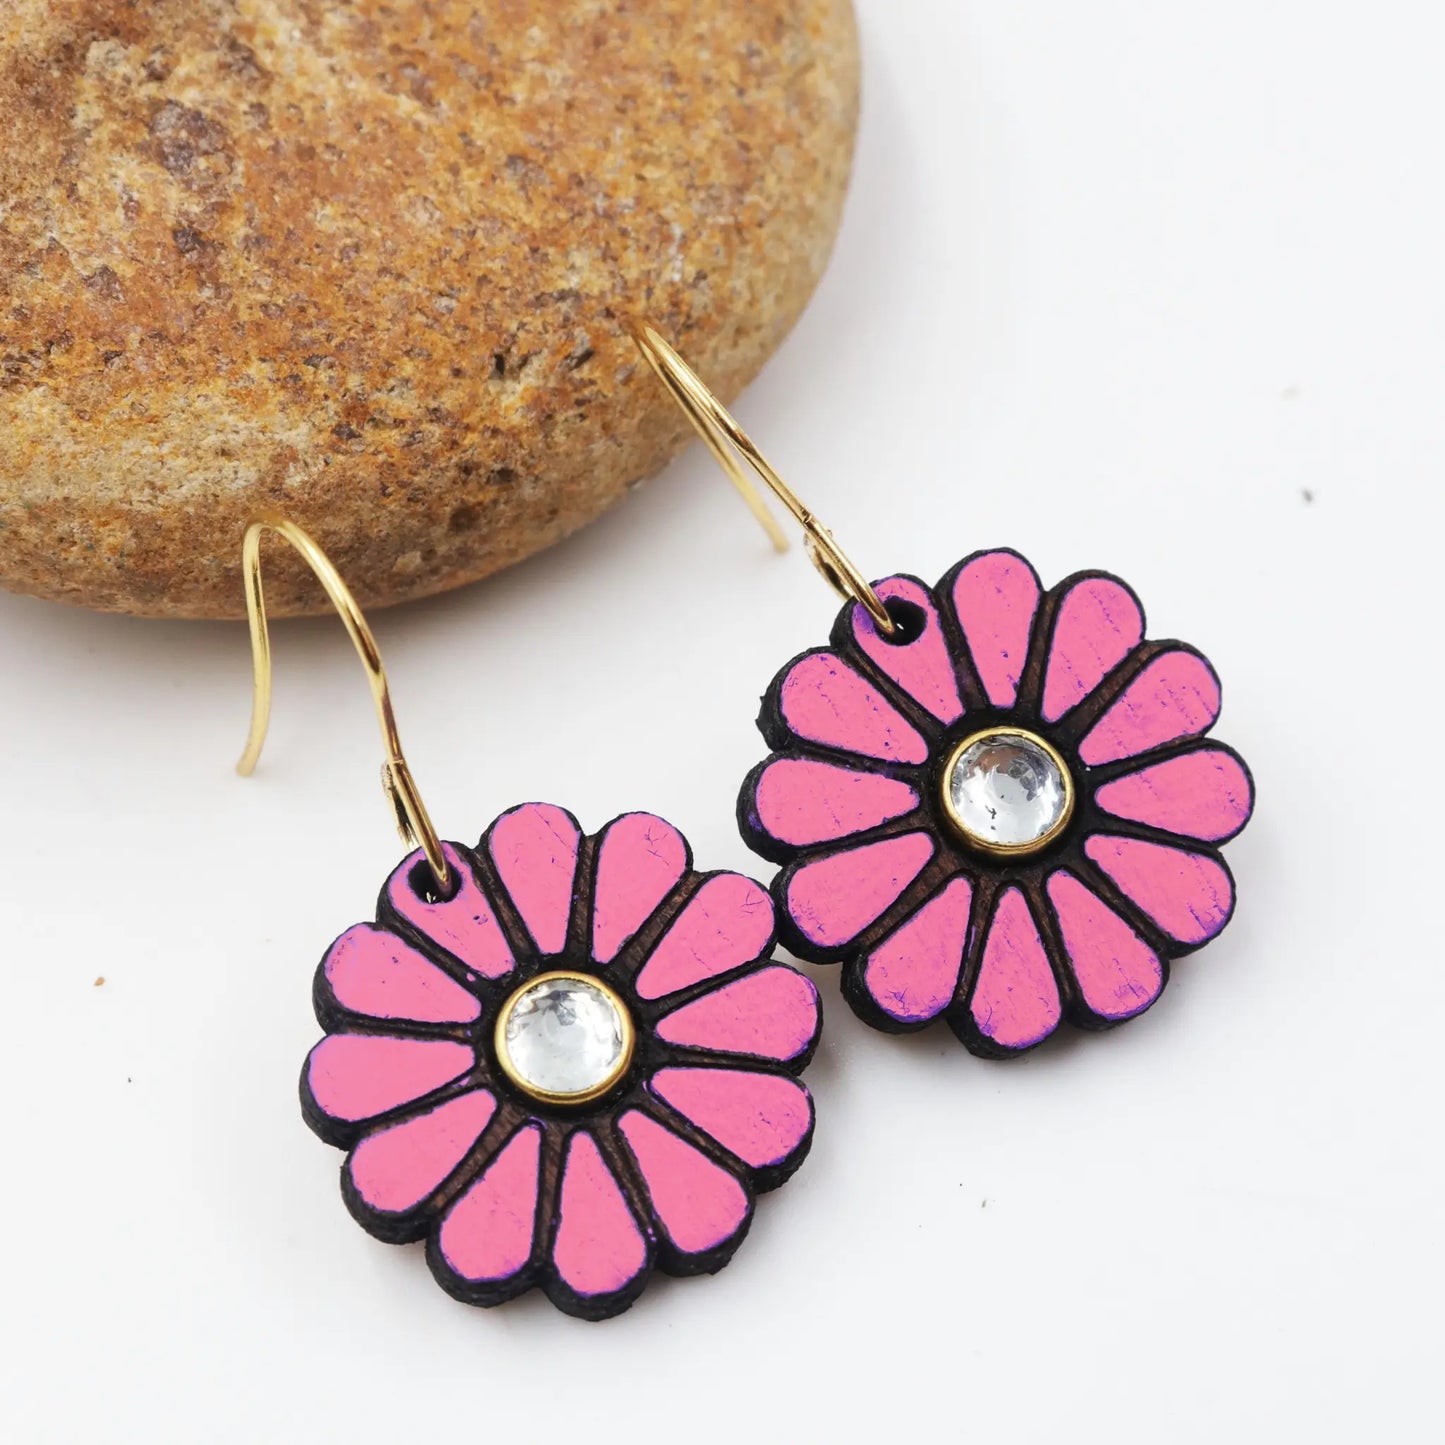 Wooden earrings | floral design embellished with kundan stones | hand-painted wooden light weight earrings